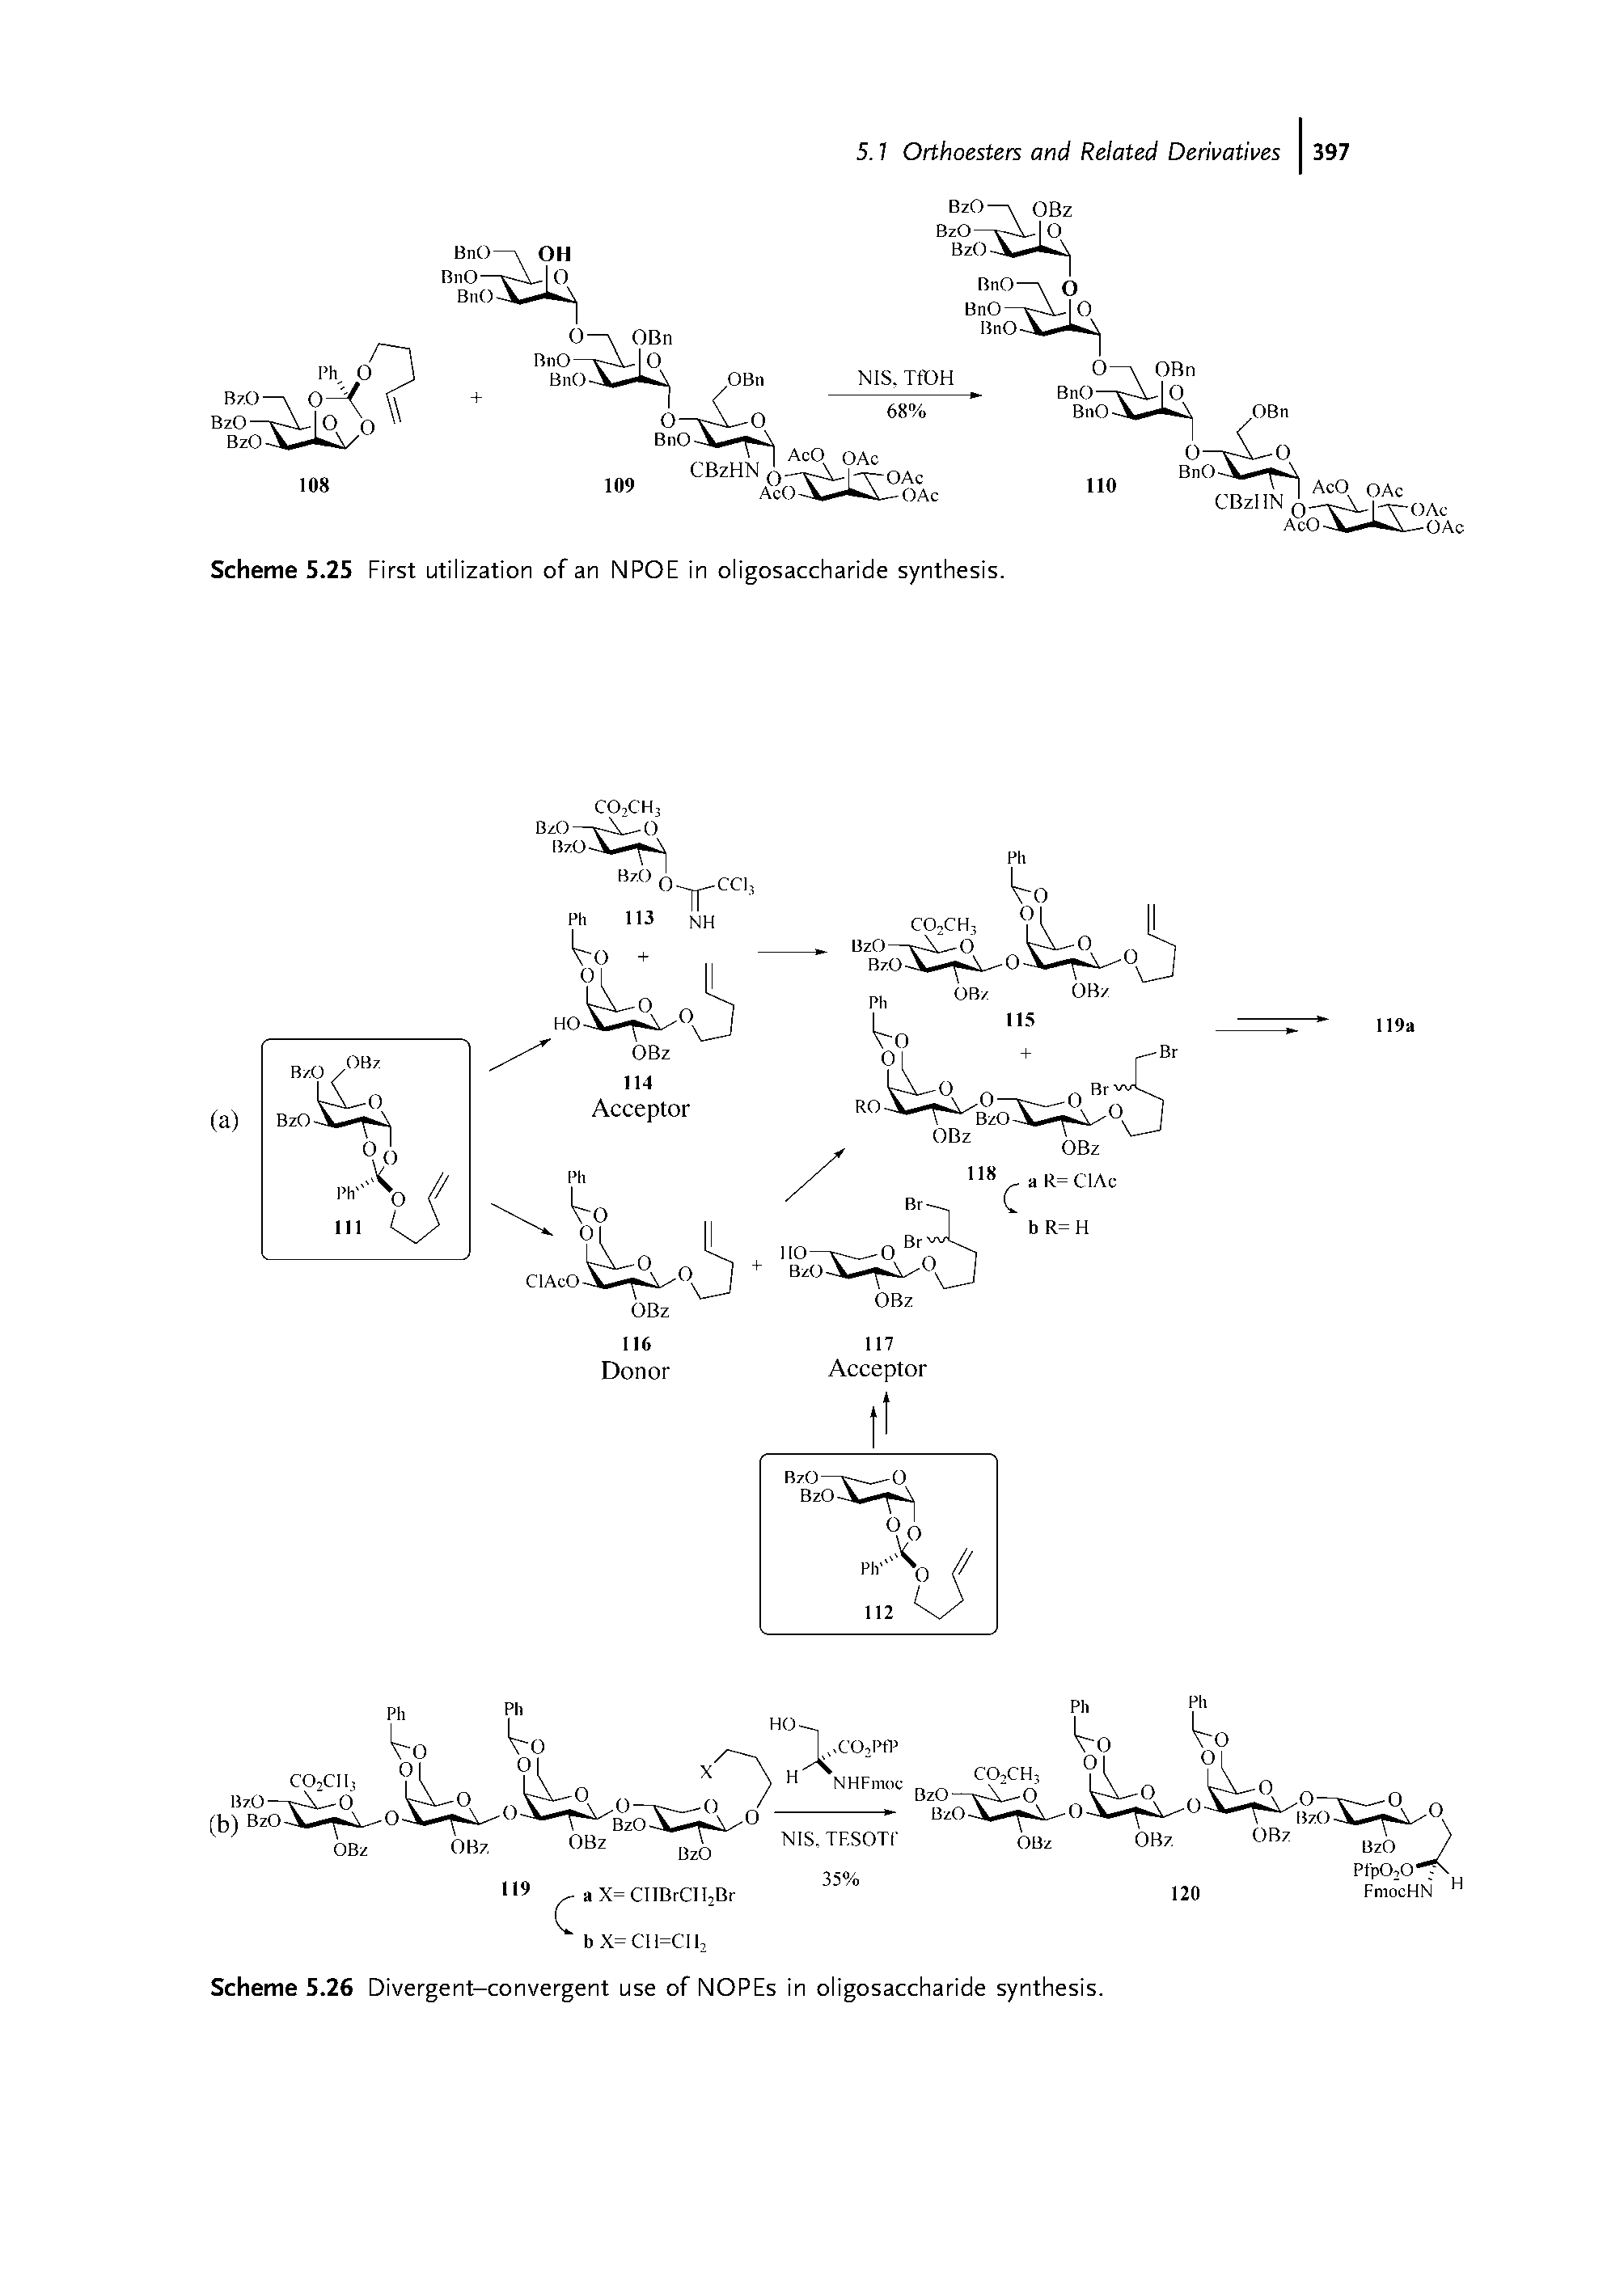 Scheme 5.26 Divergent-convergent use of NOPEs in oligosaccharide synthesis.